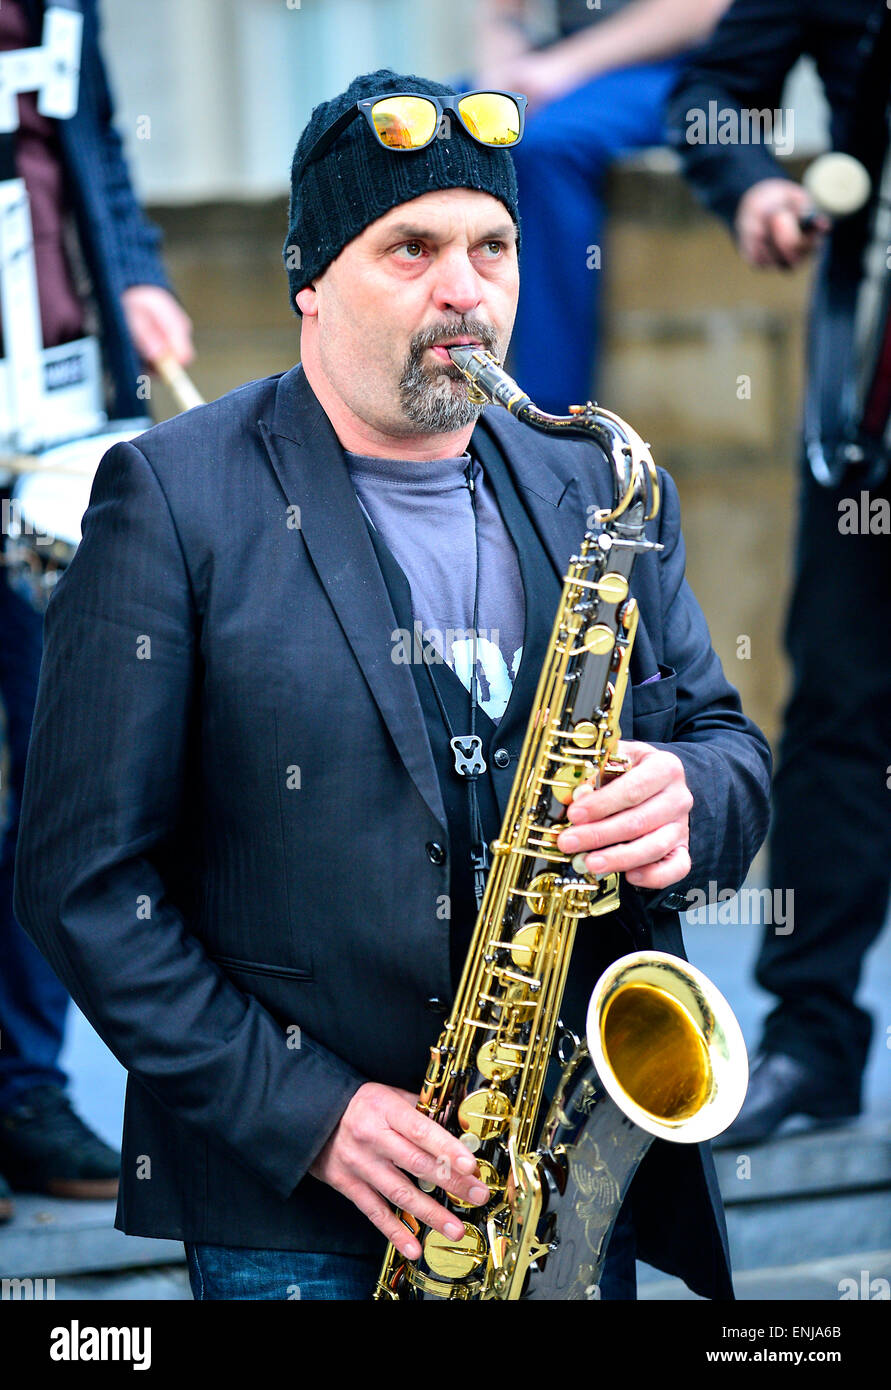 Arjan de Swart from the Jaydee Brass Band, from the Netherlands, performing at the 2015 City of Derry Jazz Festival. Stock Photo